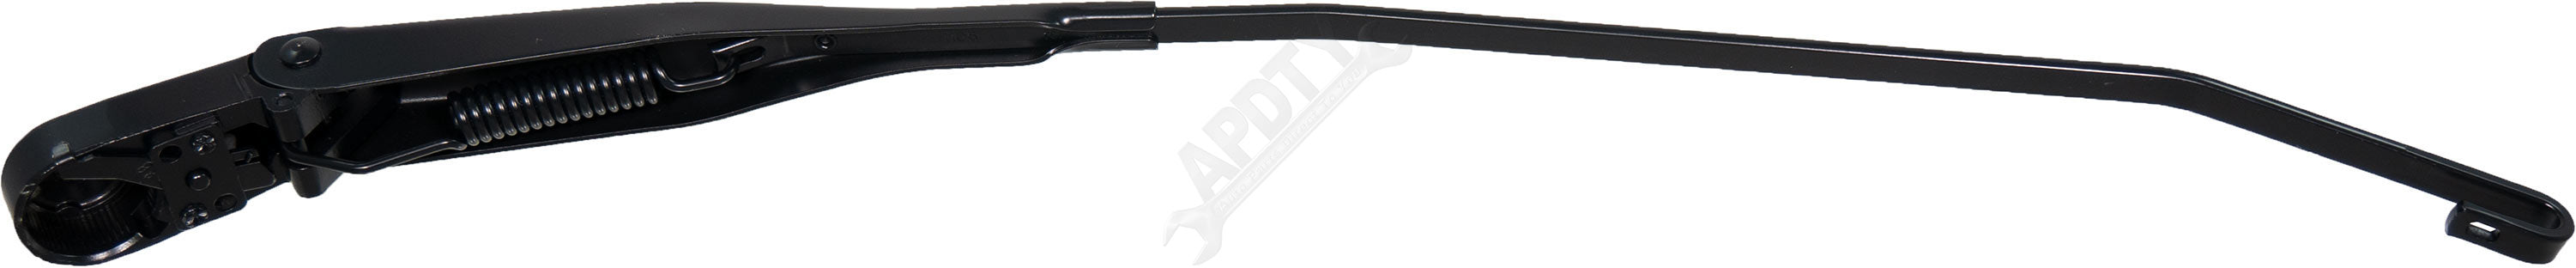 APDTY, APDTY 141764 Windshield Wiper Arm Blade Holder Fits Front Left Or Right